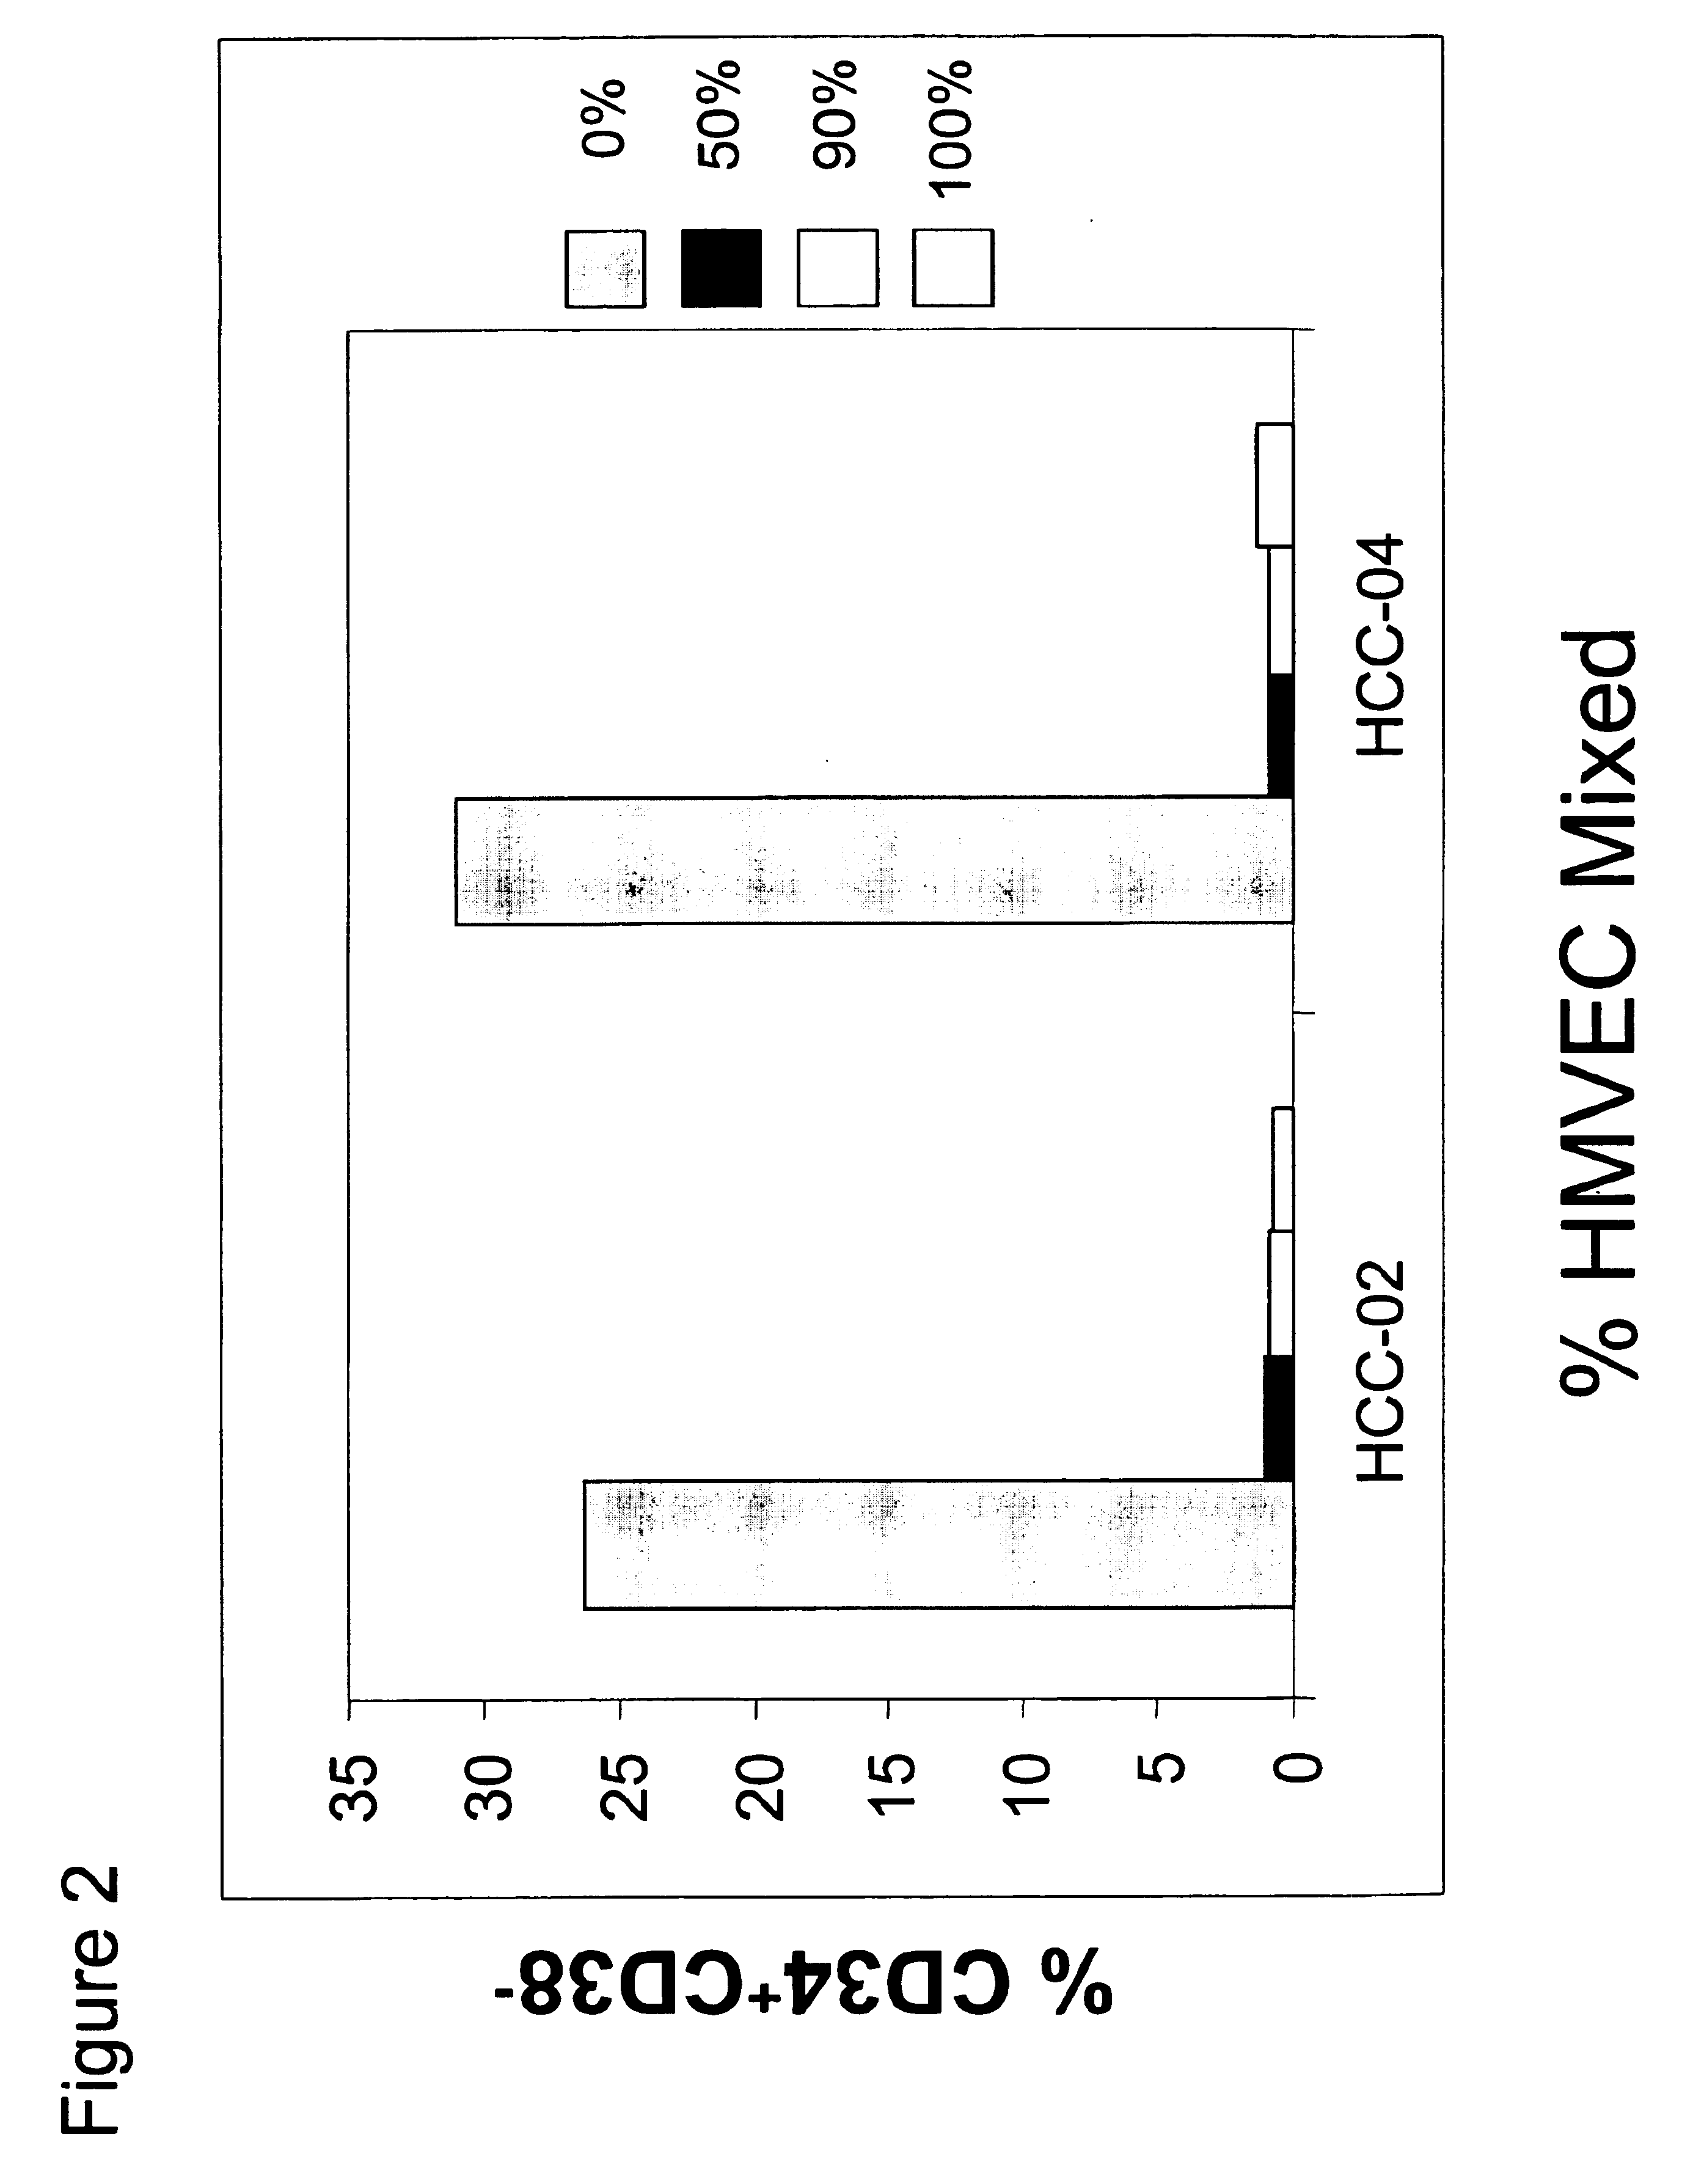 Modulation of primary stem cell differentiation using an insulin-like growth factor binding protein